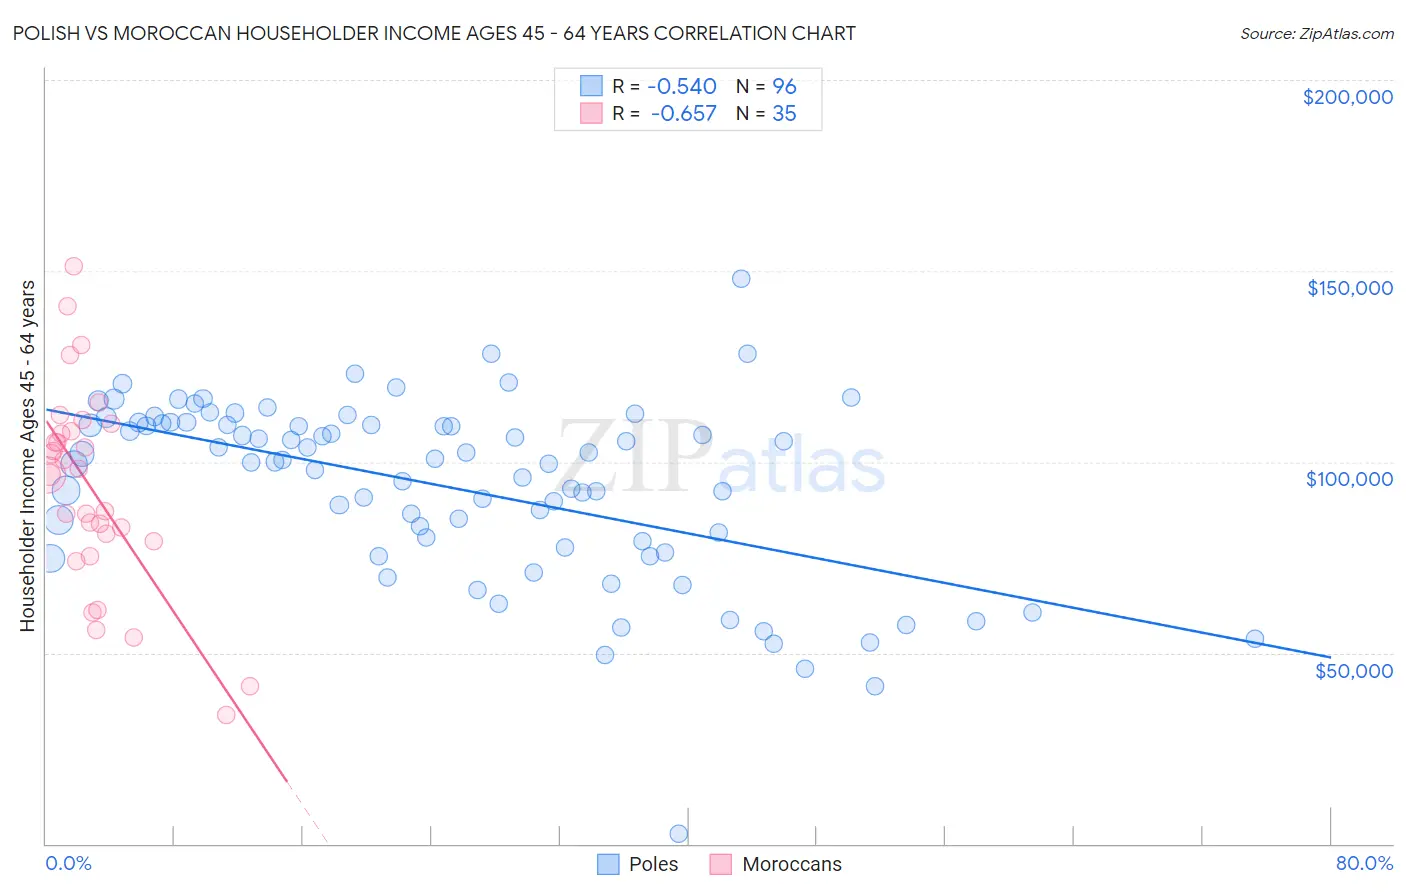 Polish vs Moroccan Householder Income Ages 45 - 64 years